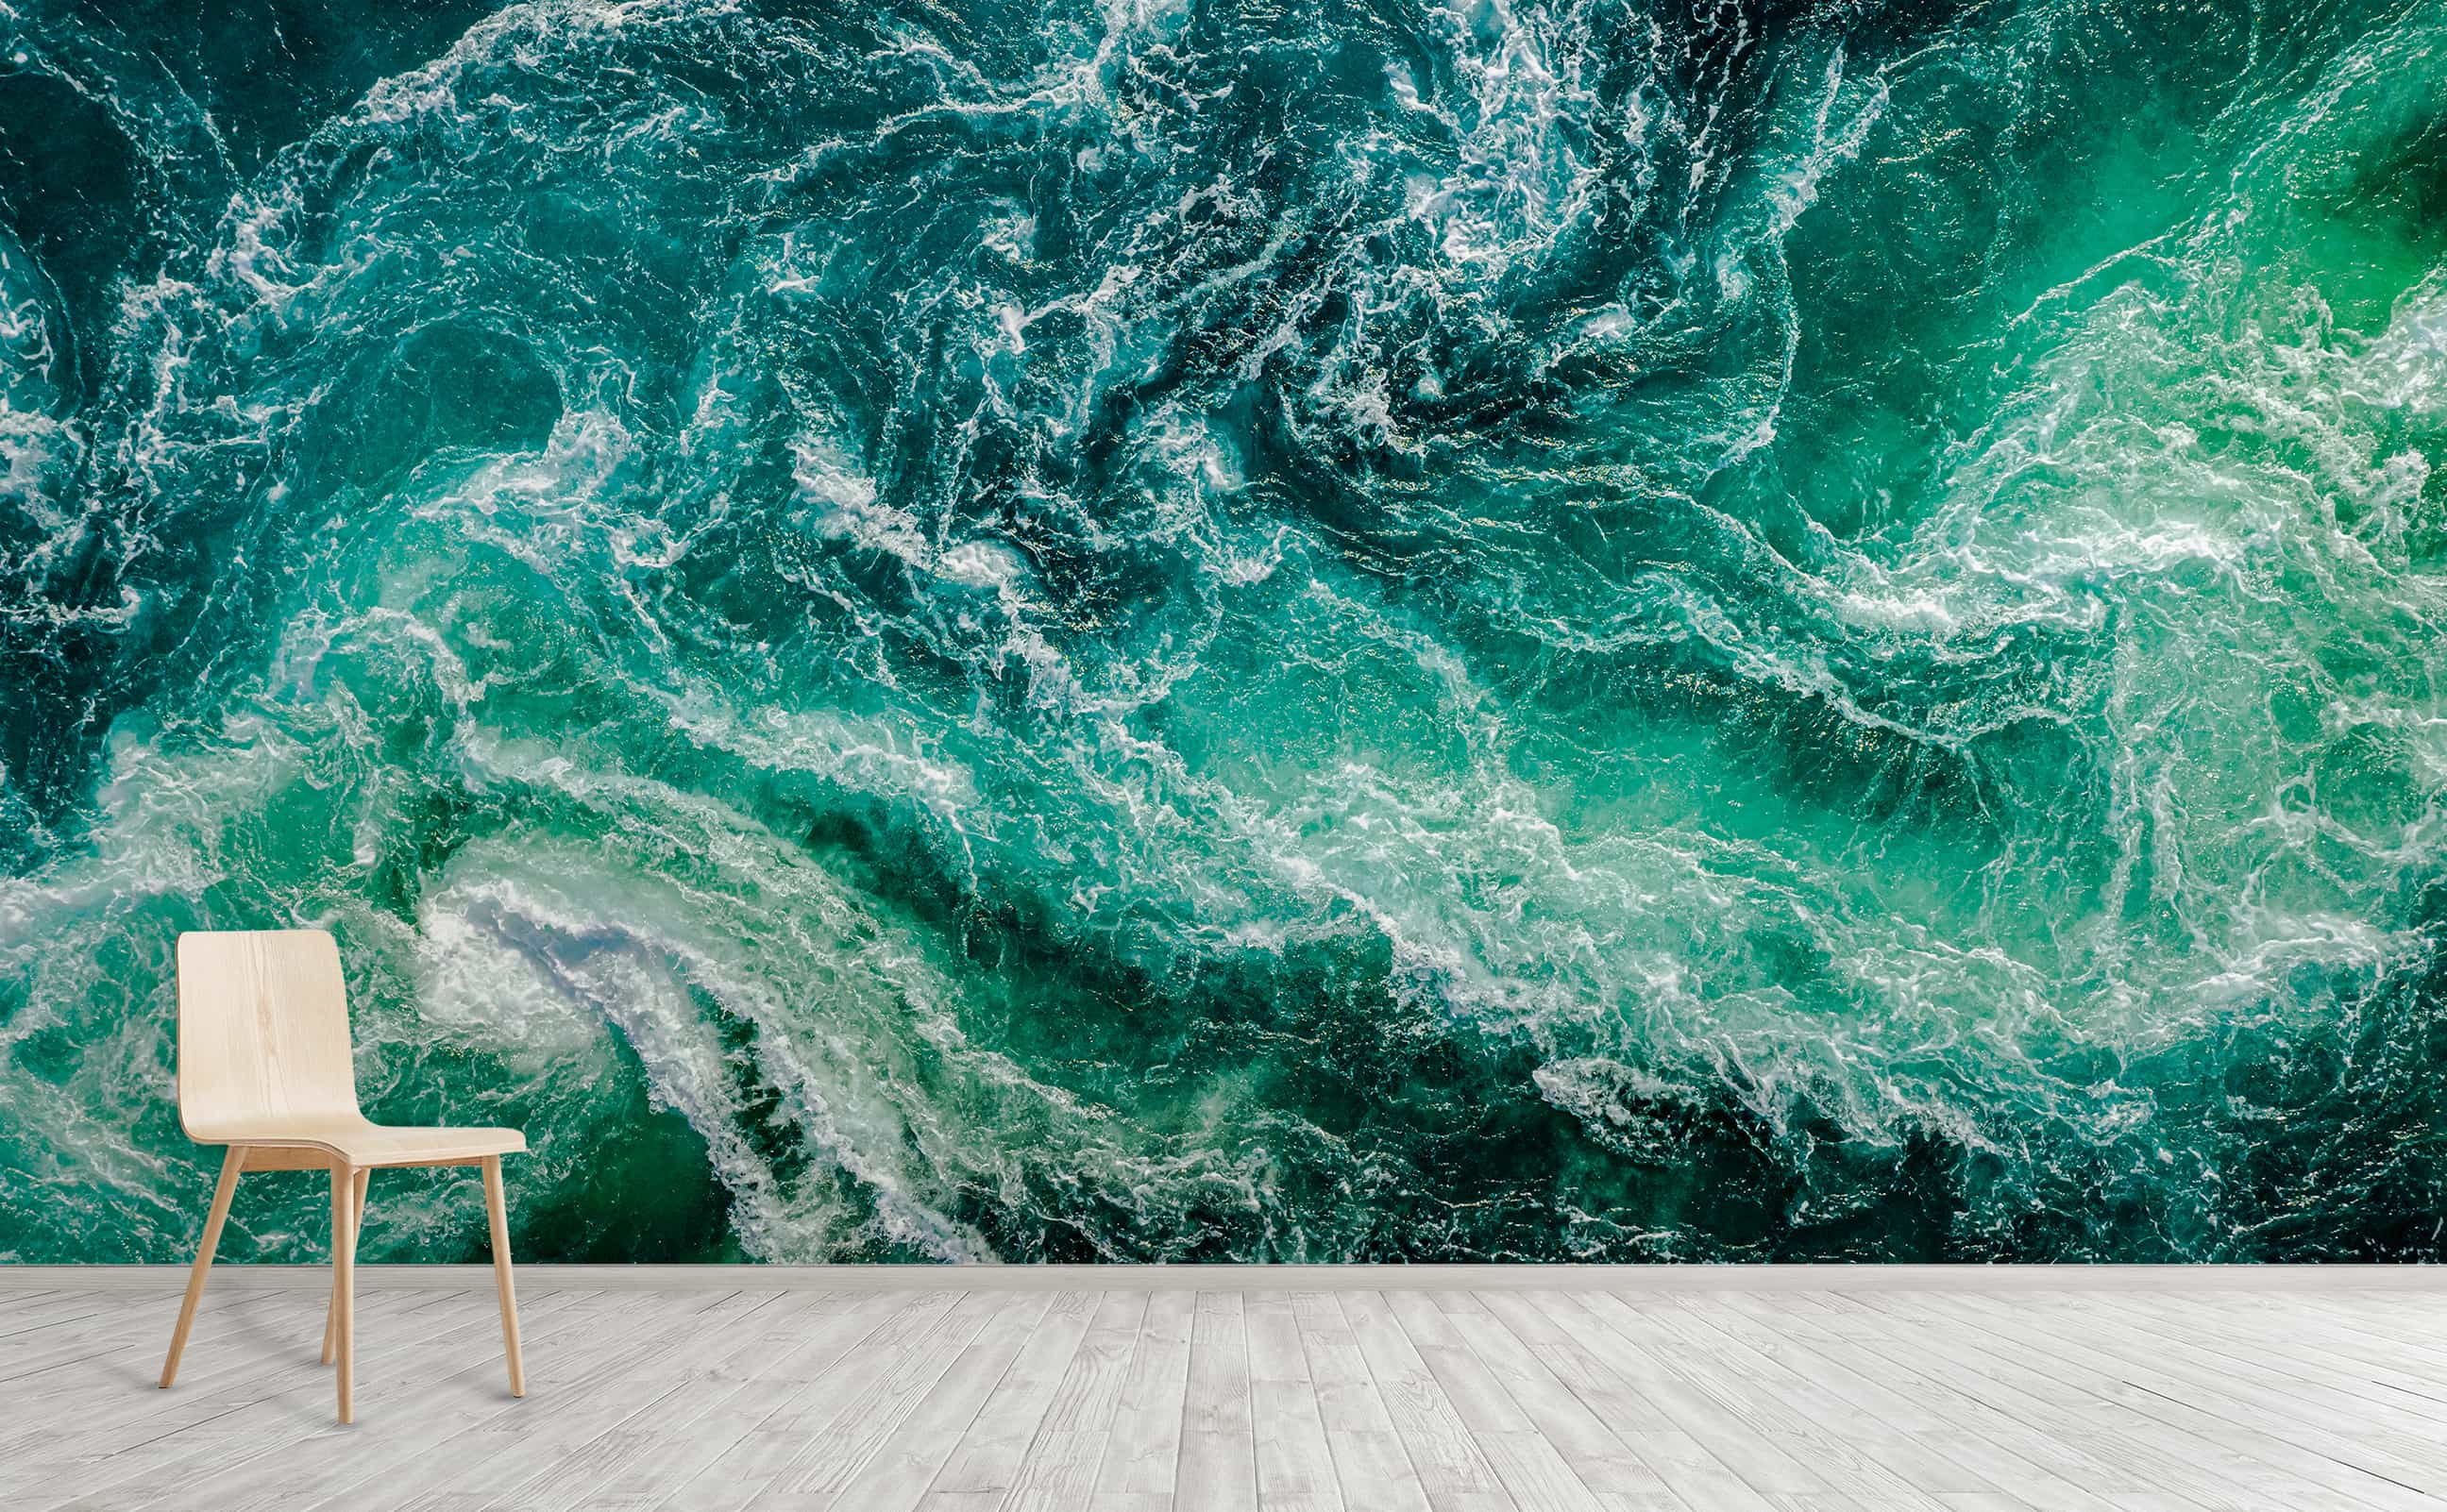 Maelstrom Wall Mural by Walls Need Love┬«